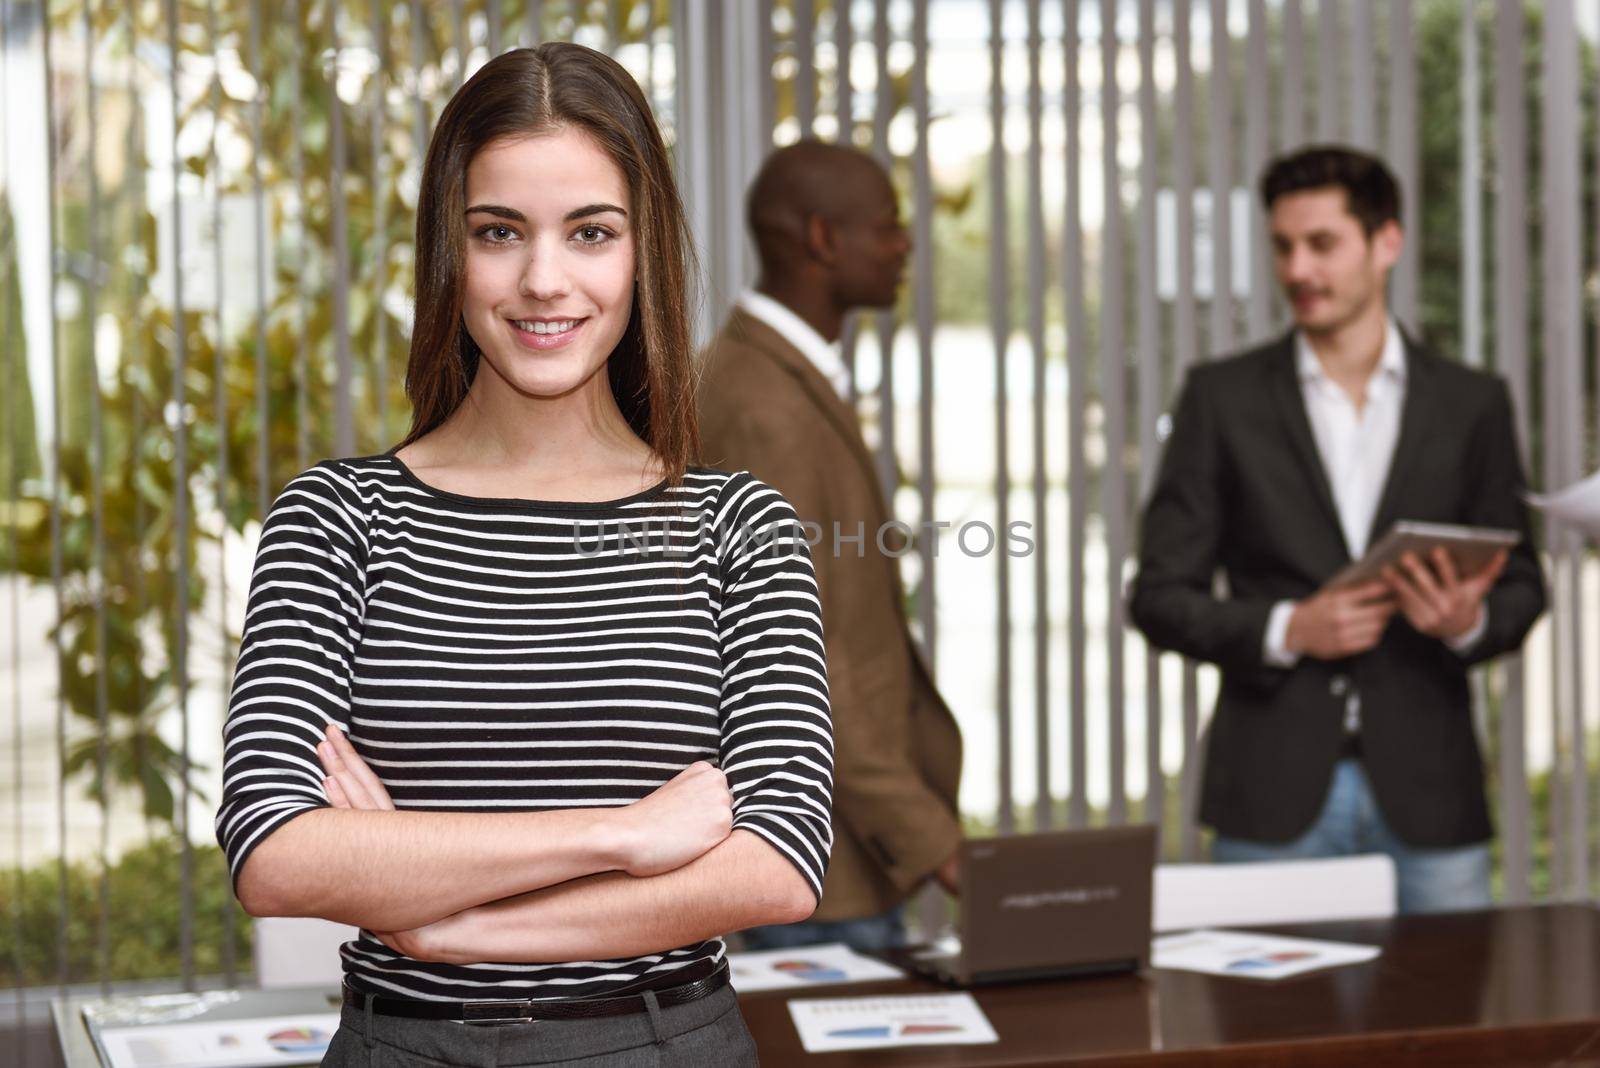 Young businesswoman leader looking at camera with arms crossed in working environment. Group of multiracial people in the background